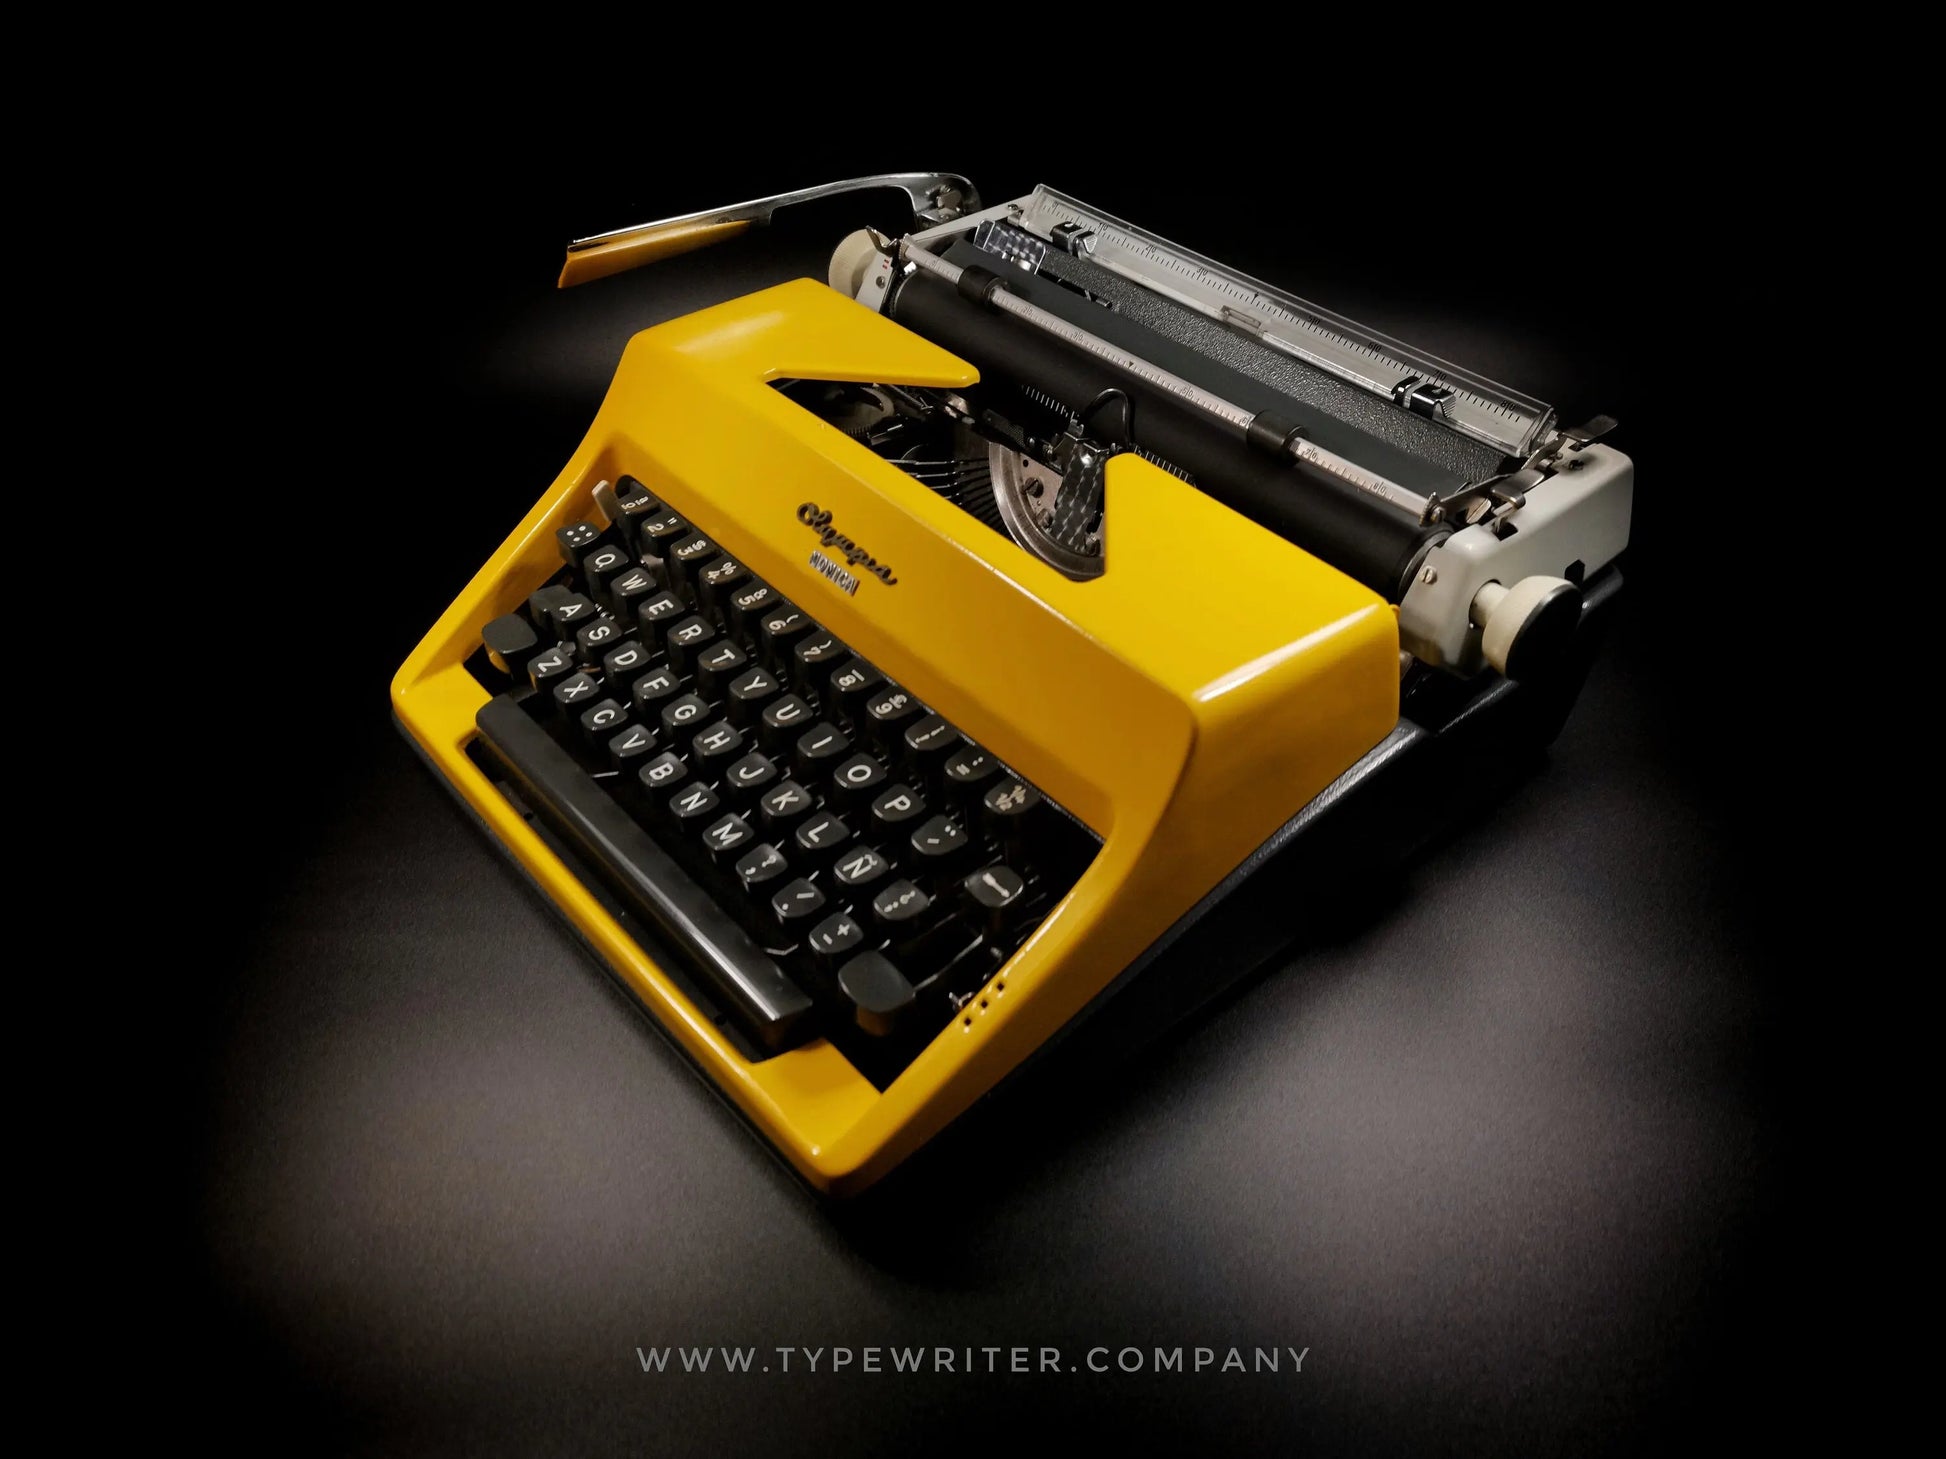 SALE! - Limited Edition Olympia SM8 Yellow Typewriter, Vintage, Mint Condition, Professionally Serviced - ElGranero Typewriter.Company